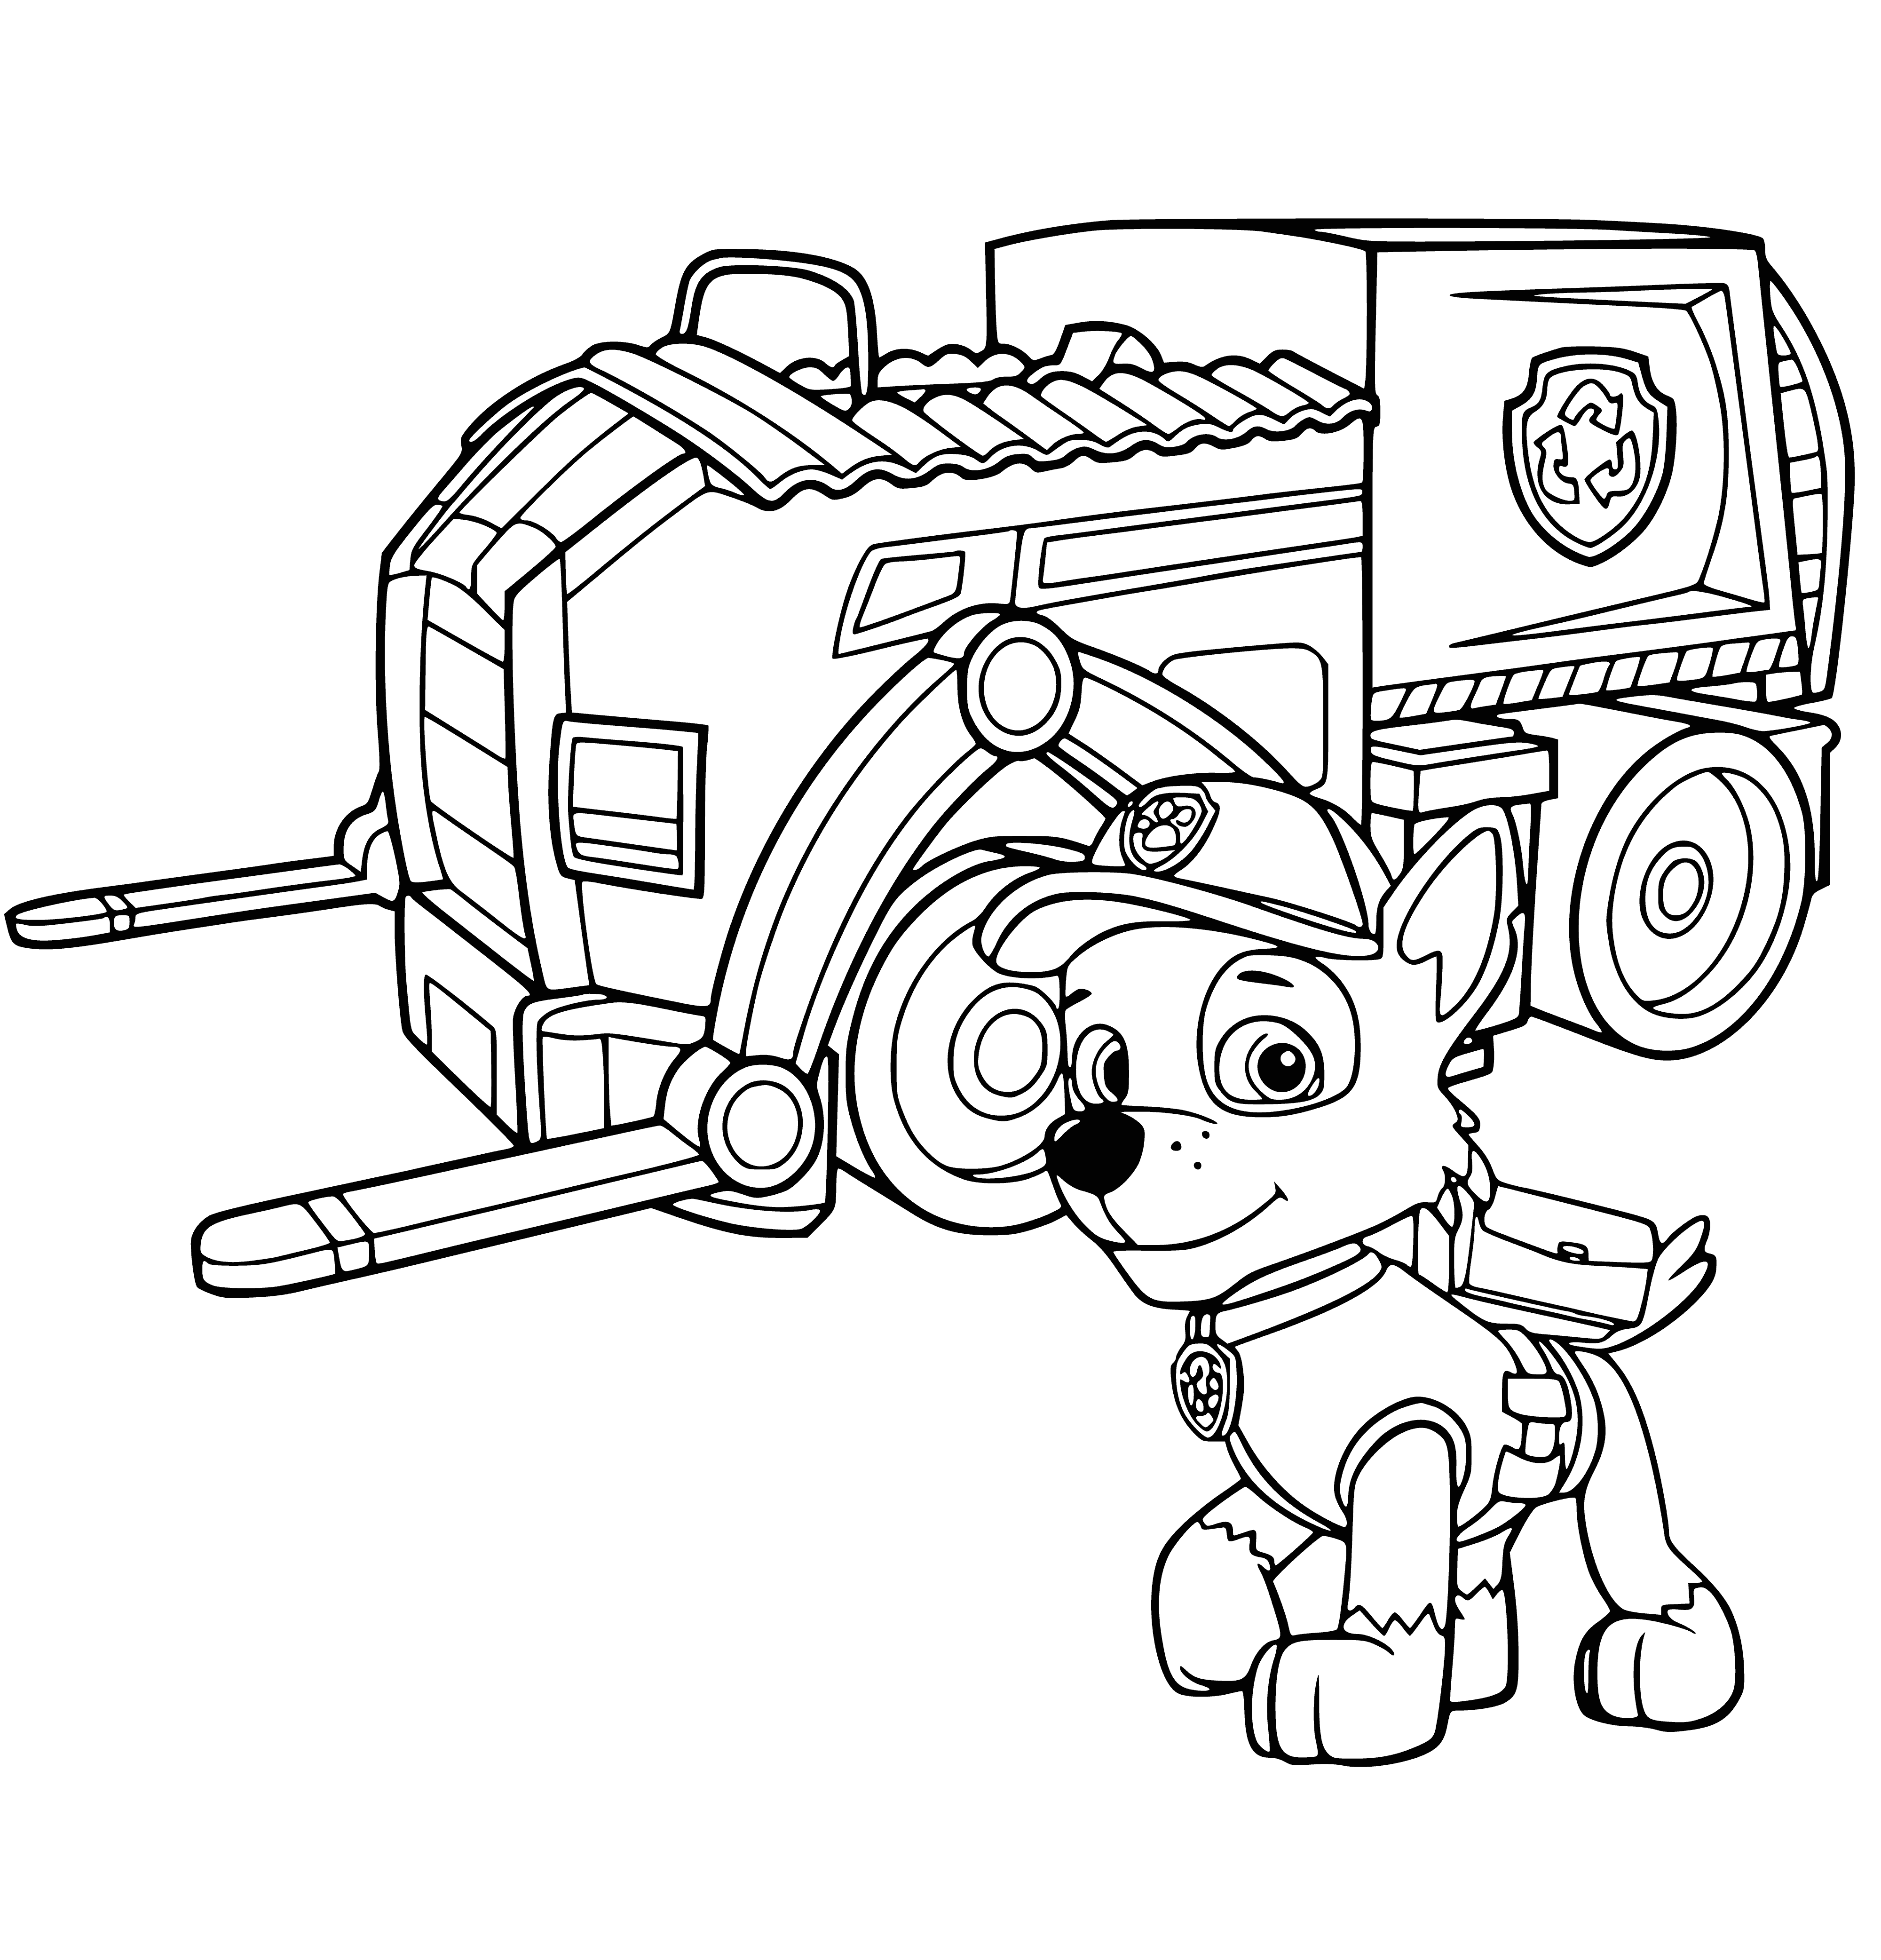 coloring page: Rocky stands happily beside a large machine, sporting a blue vest, hard hat and a smile.